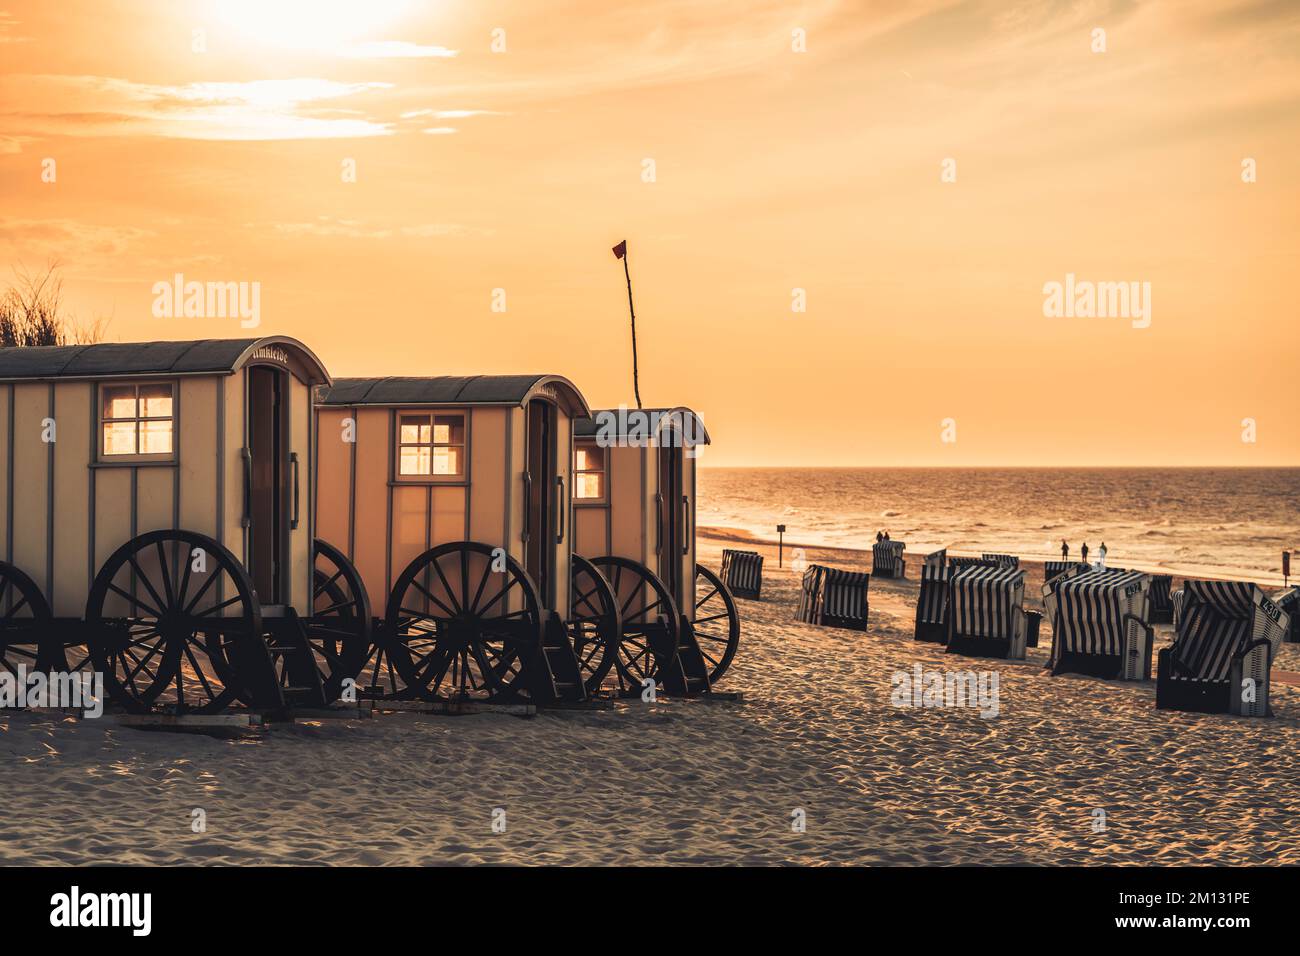 Changing rooms on the beach in the evening mood, beach chairs, in the background the North Sea, blurred people in the distance Stock Photo